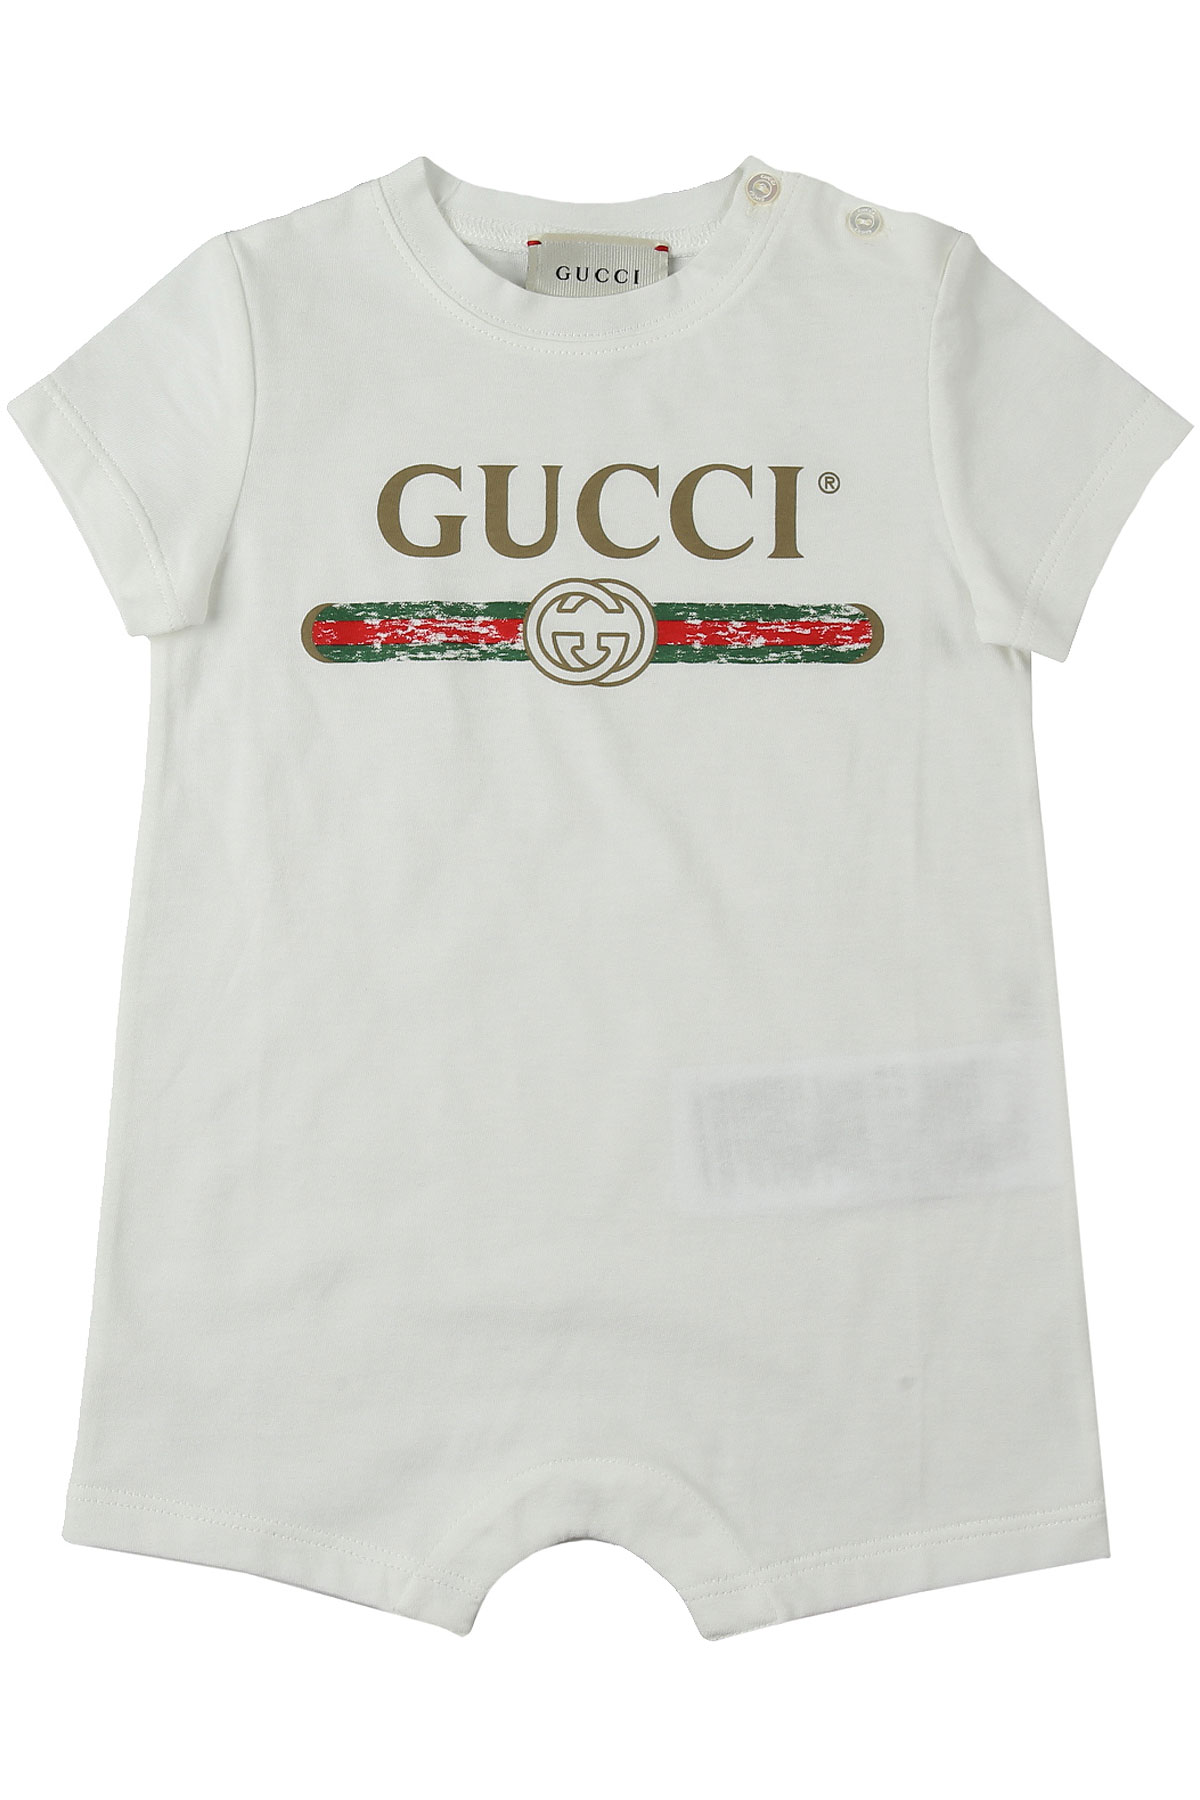 Baby Boy Clothing Gucci, Style code: 508588-x3l64-9112